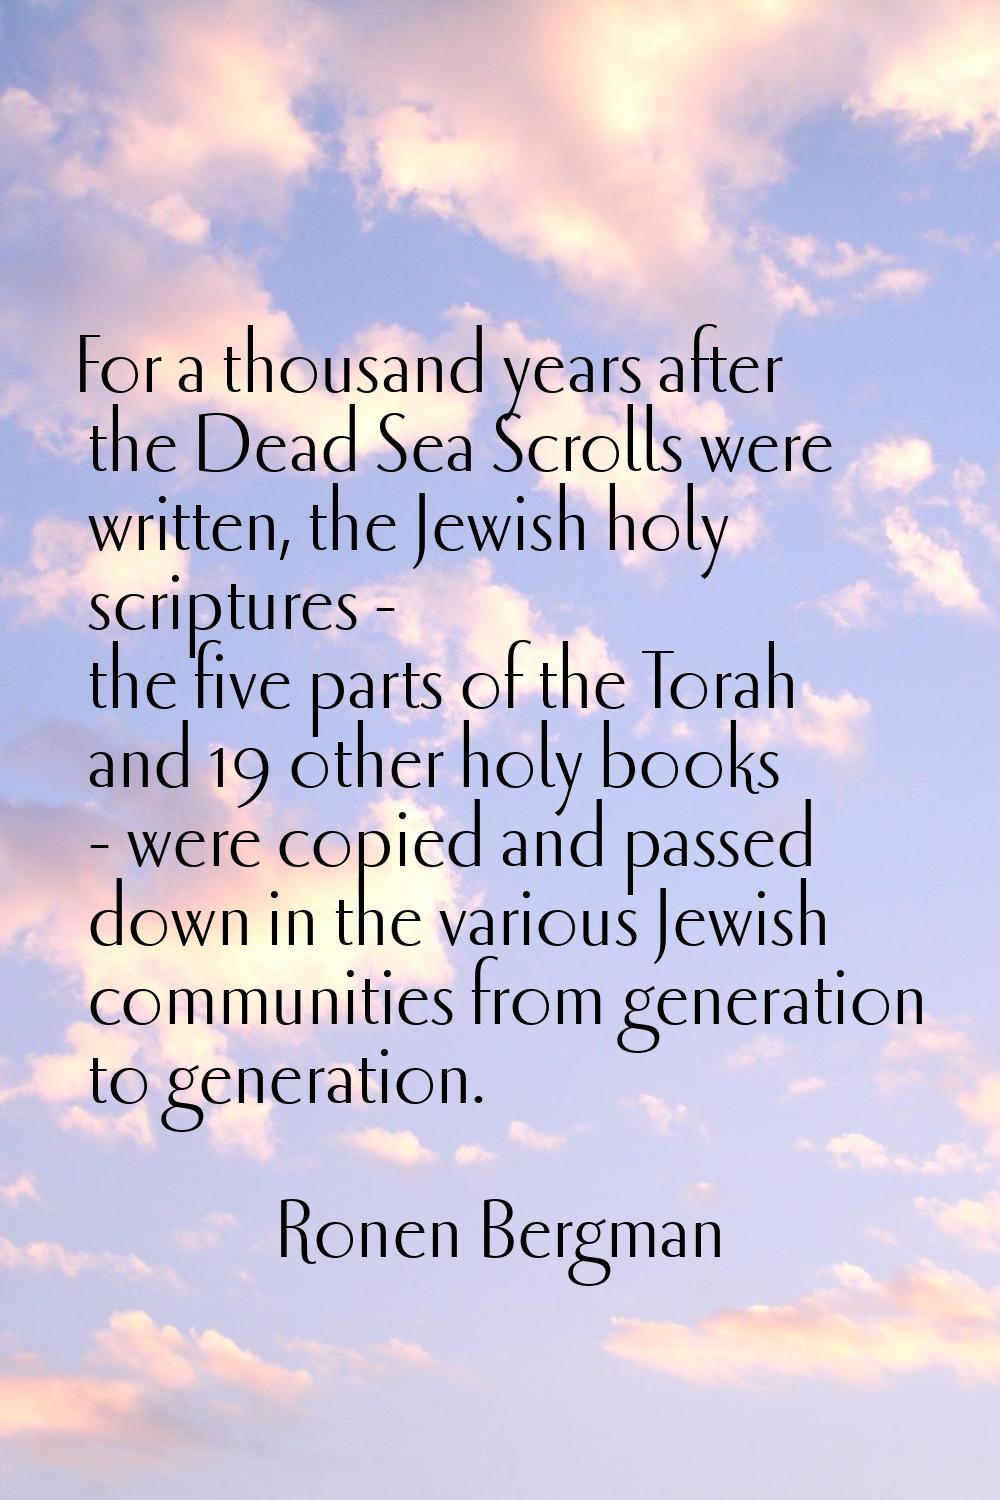 For a thousand years after the Dead Sea Scrolls were written, the Jewish holy scriptures - the five